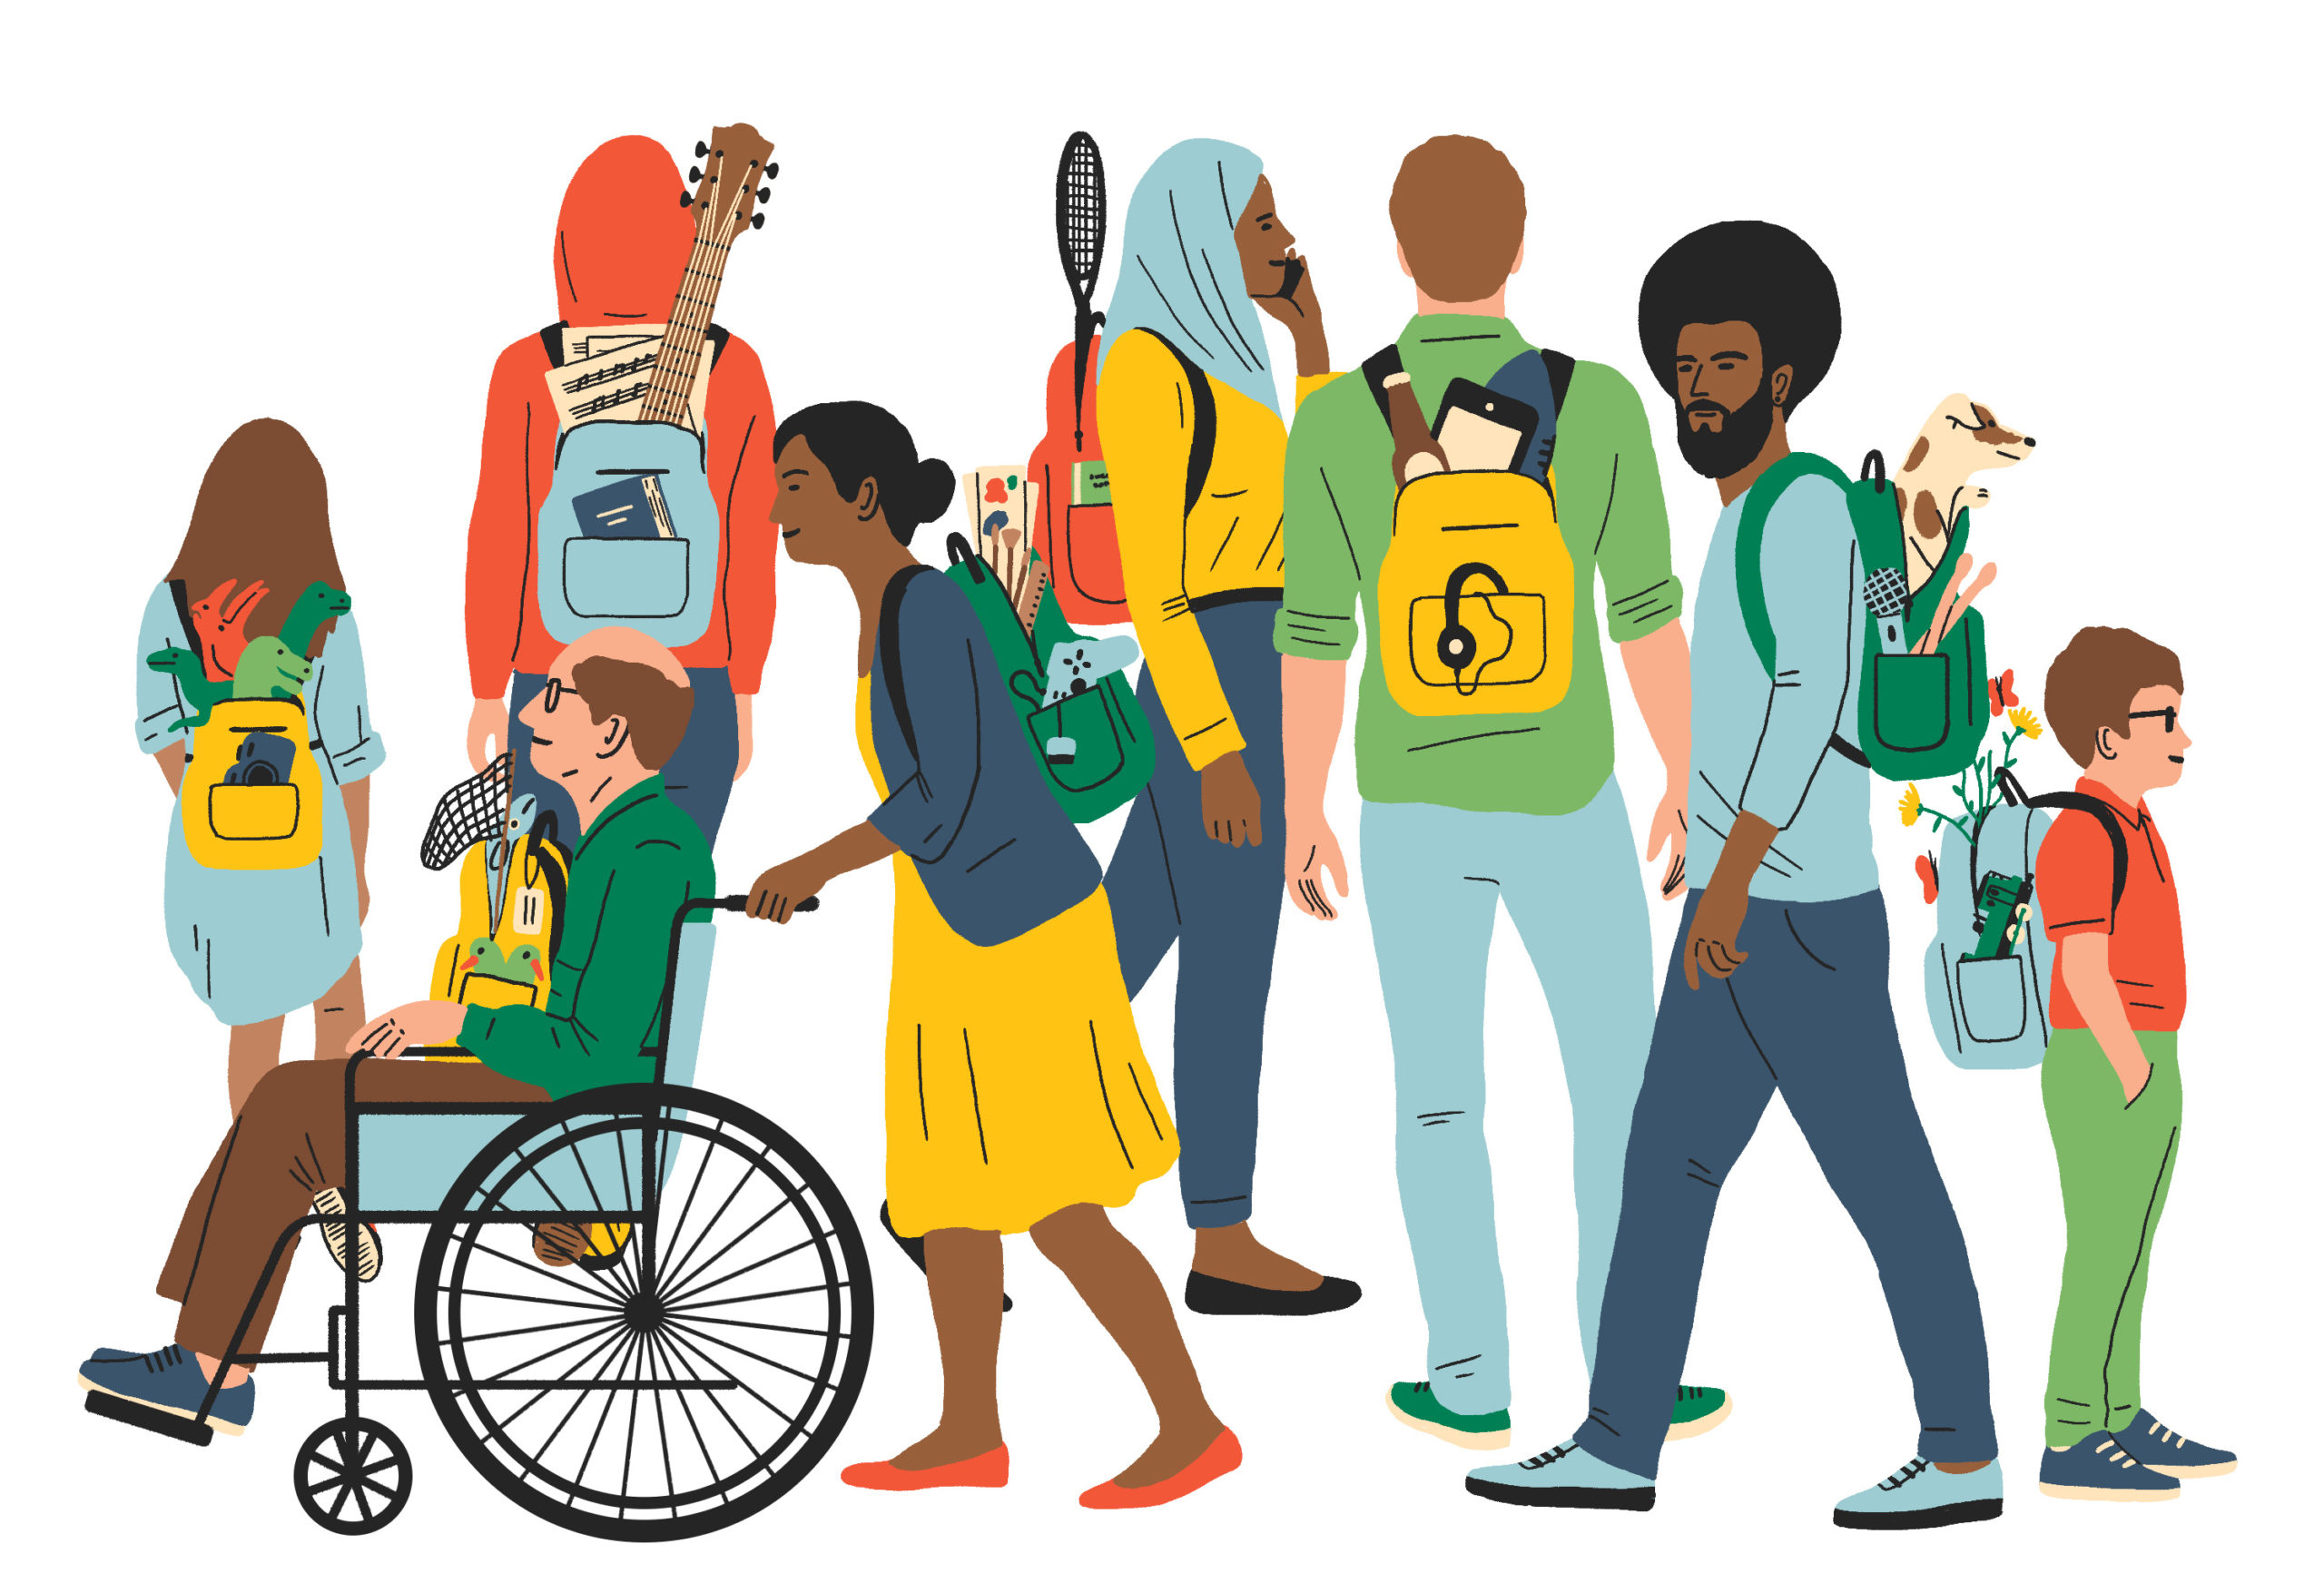 A group of drawn people gathered together from different backgrounds. One is being pushed in a wheelchair, one is carrying a tennis racket in their bag and another carrying a guitar. The people represent the diverse visitors who visit museums. 